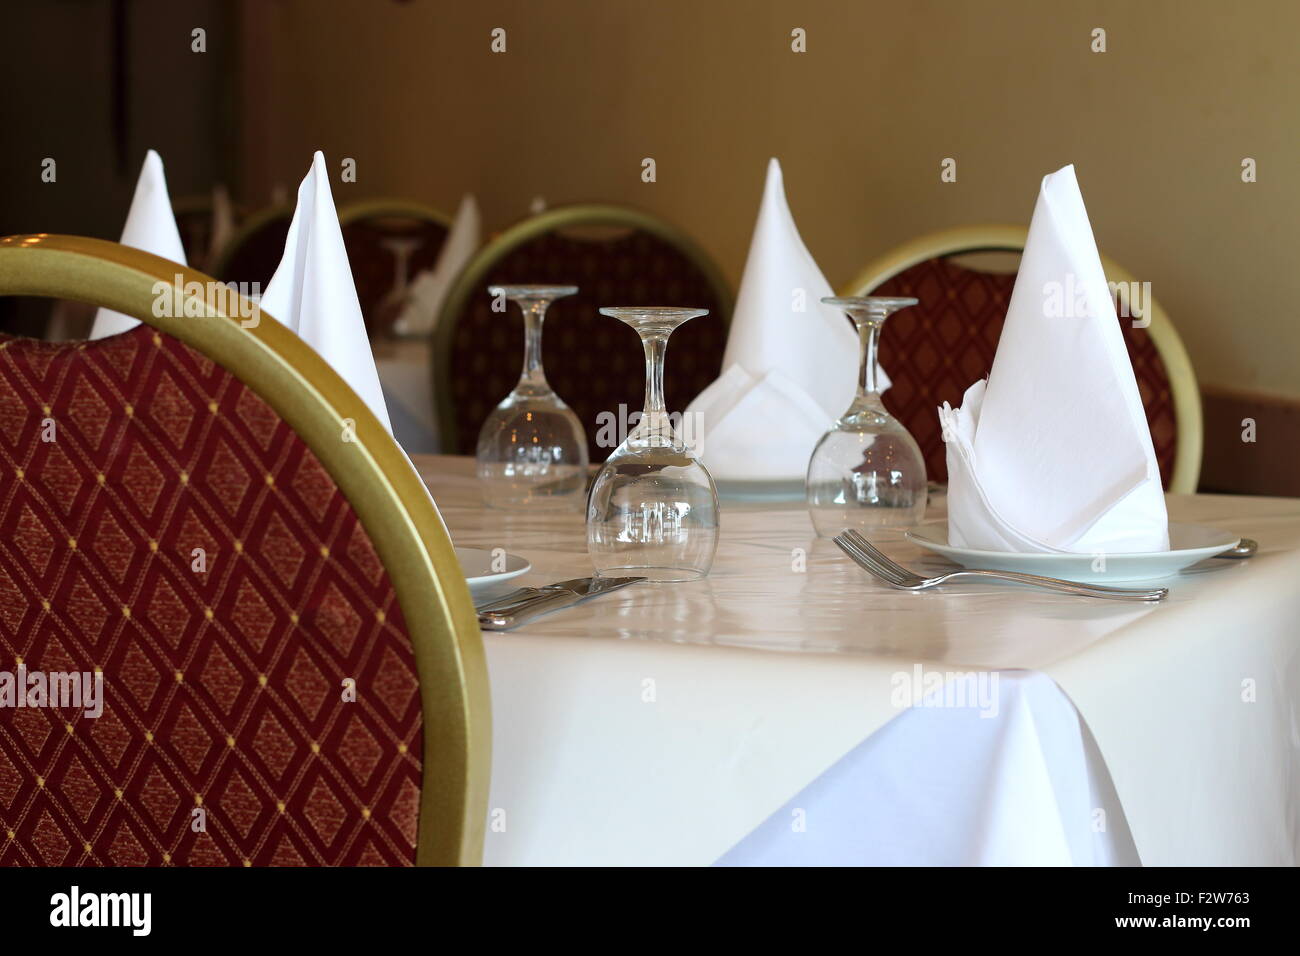 Glasses and napkins on a table at a restaurant Stock Photo